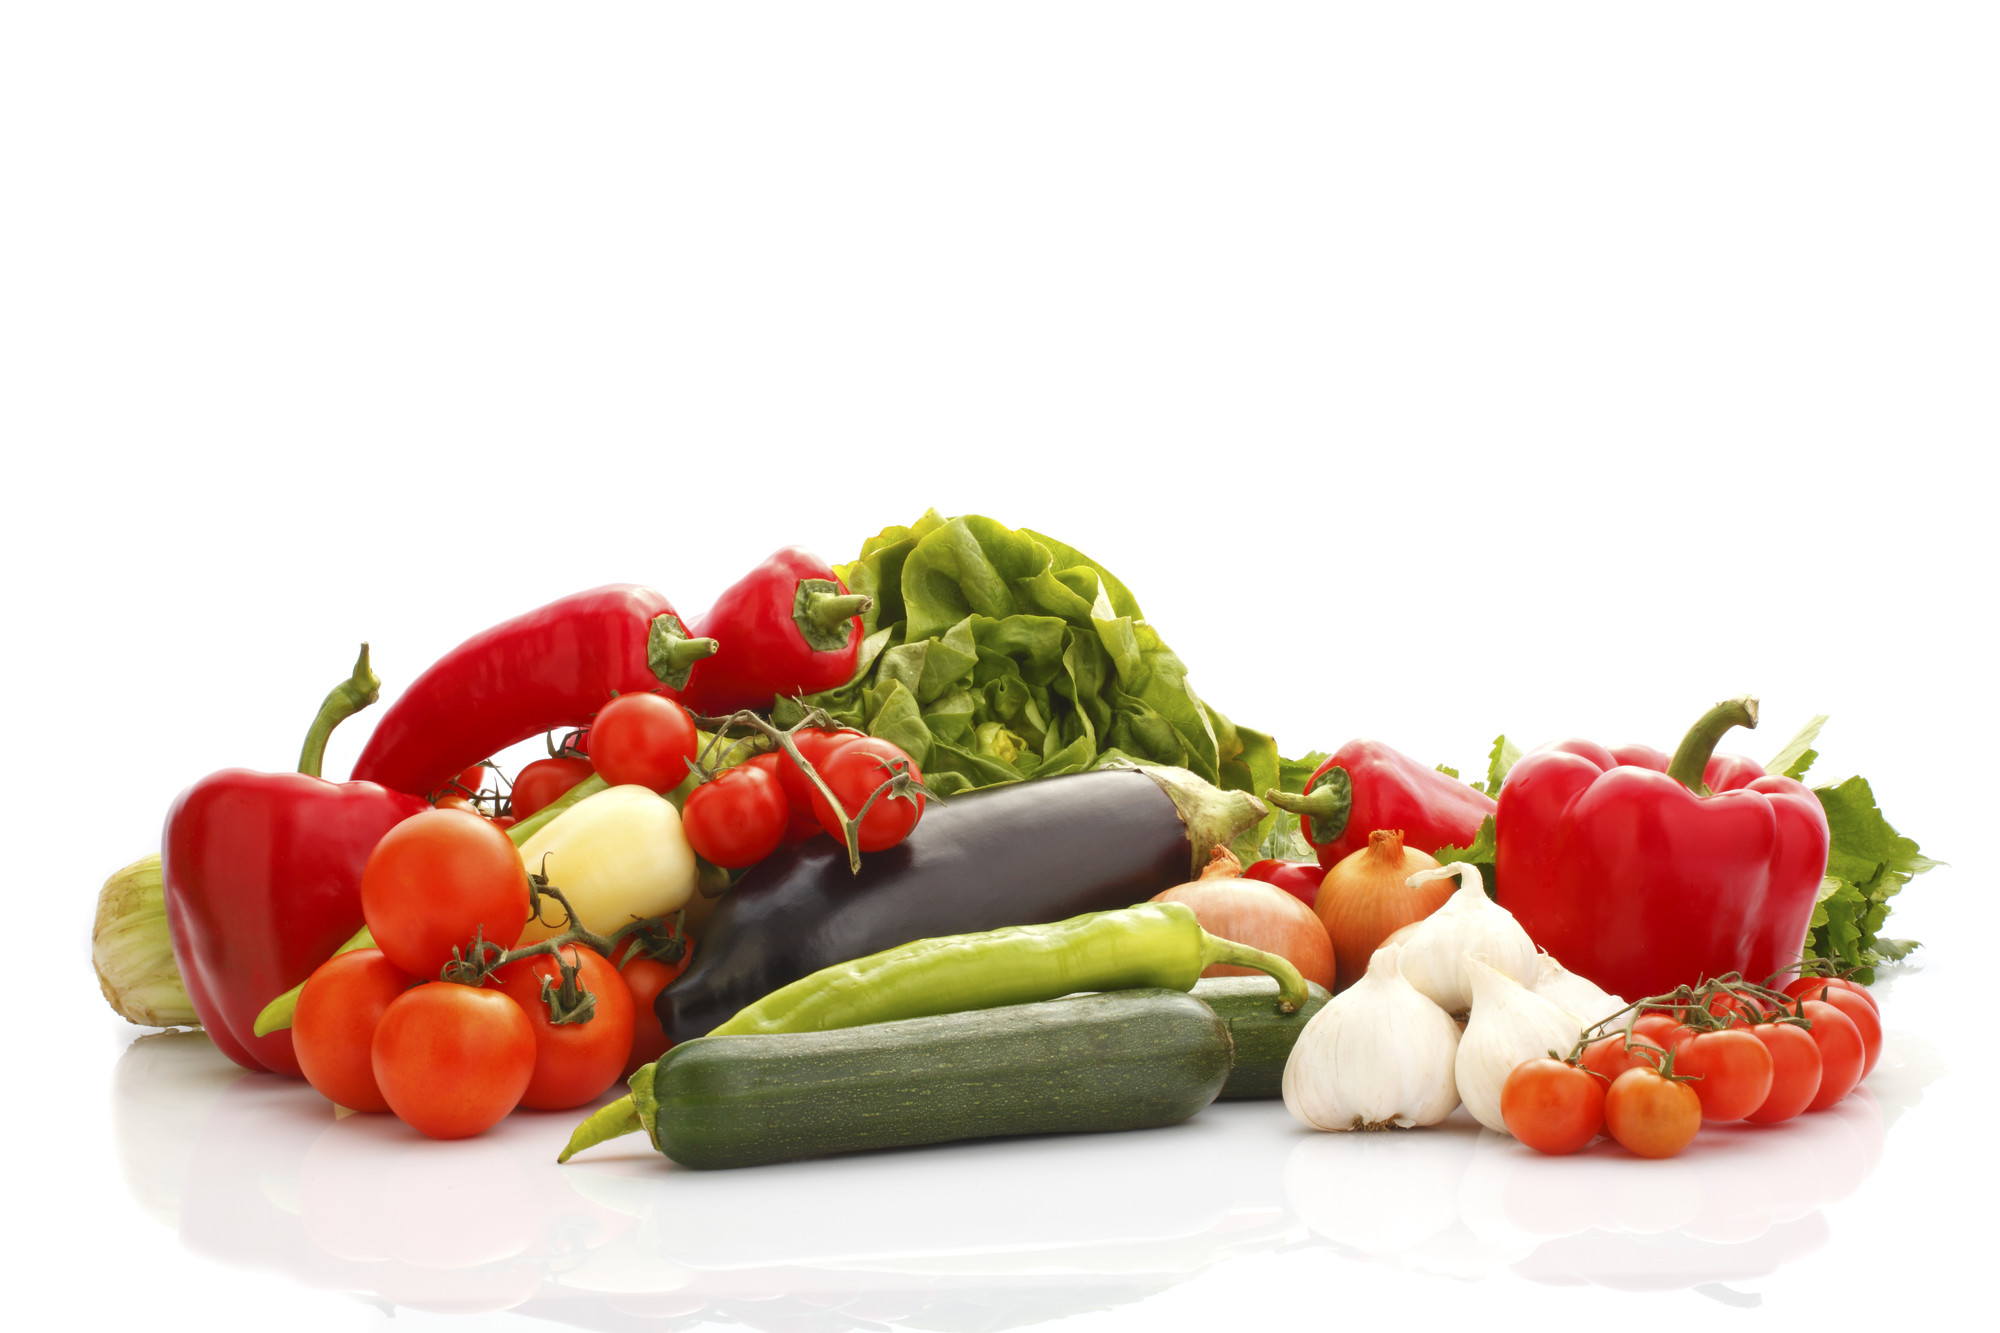 RS6512_sy_colorful_vegetable_sh_98201477_clean_2015-lpr